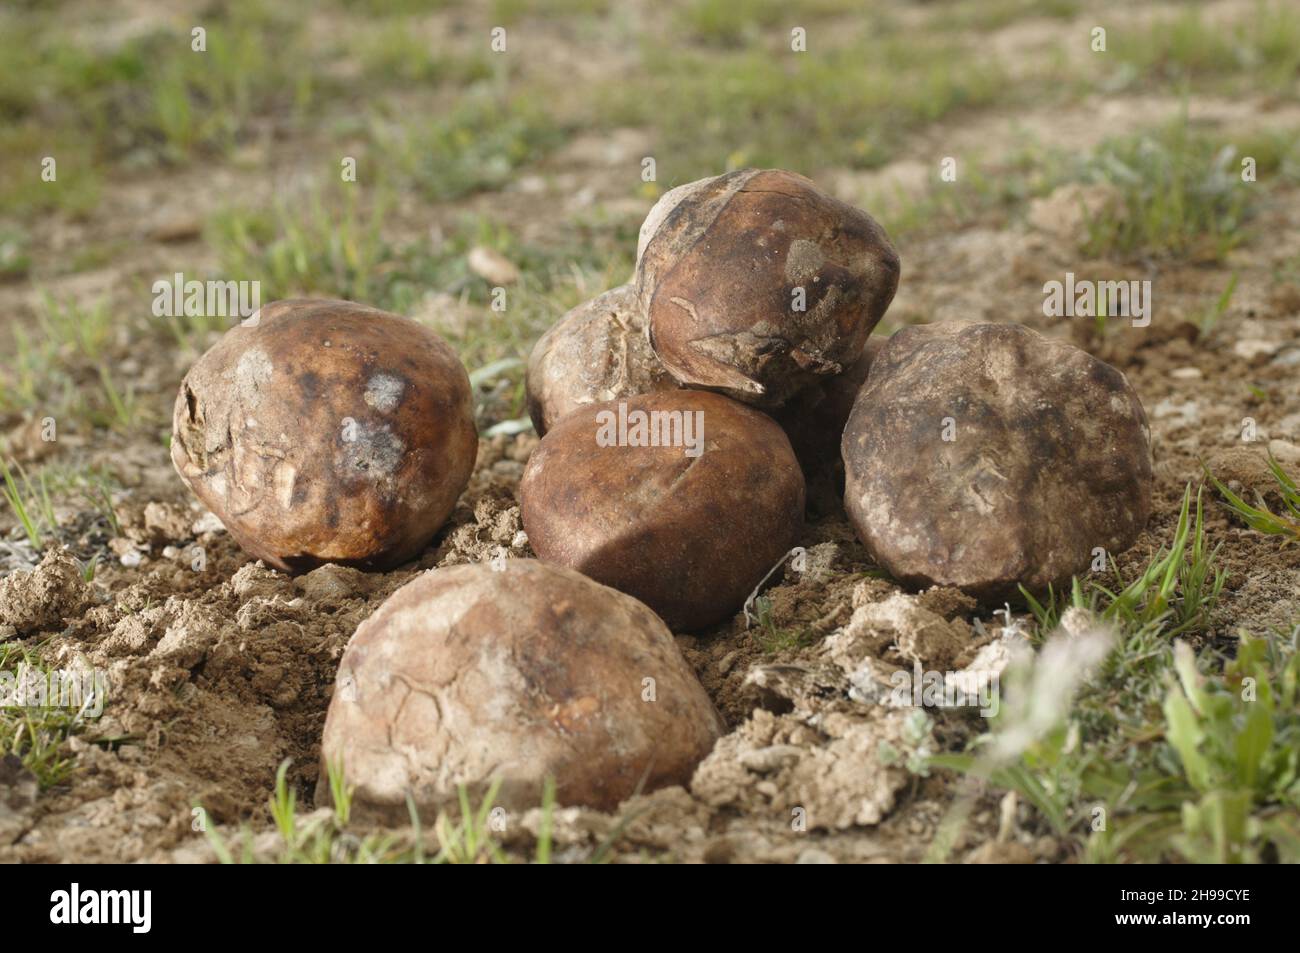 The terfeziaceae, earth criadillas, or desert truffles, are fungi belonging to the ascomycetes. Stock Photo